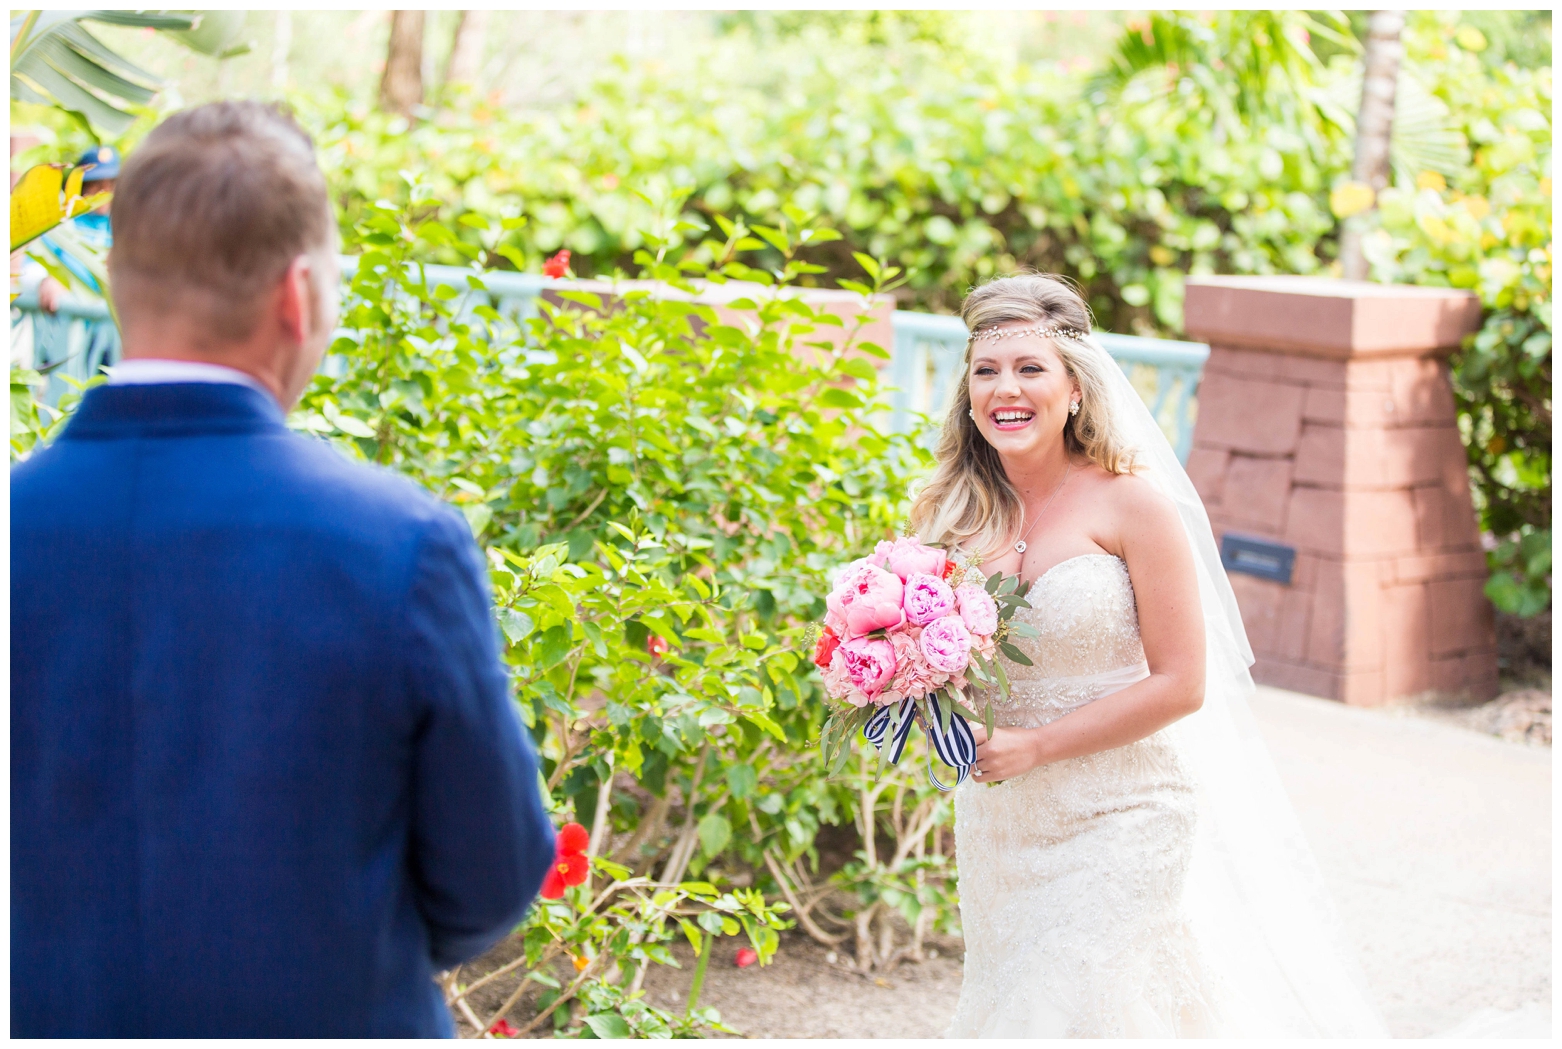 View More: http://hopetaylorphotographyphotos.pass.us/chelsey-and-marc-wedding